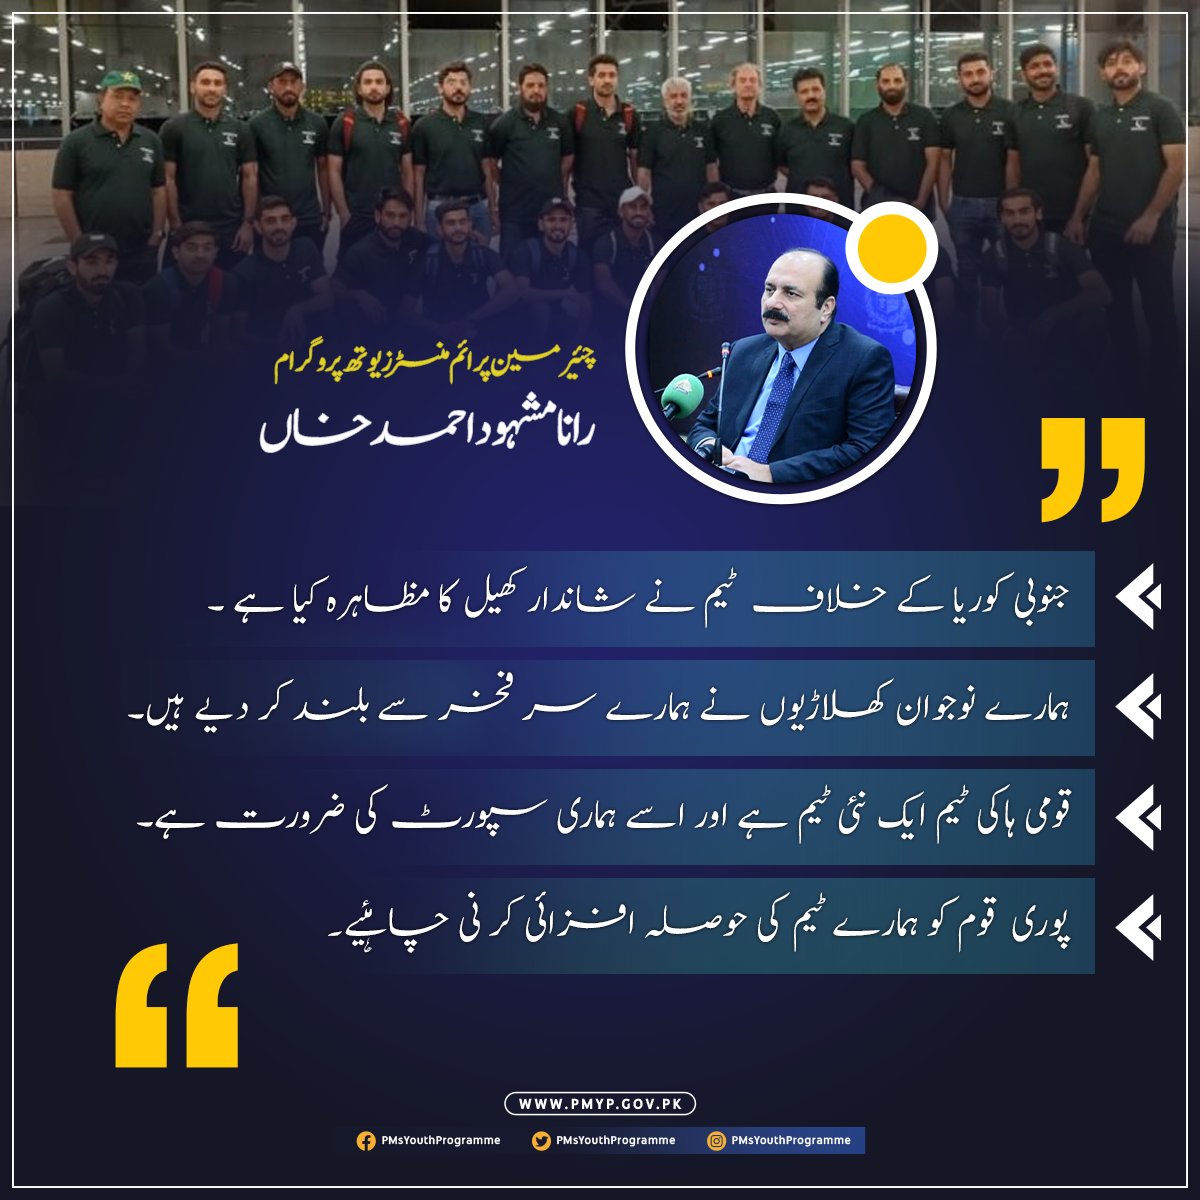 𝗪𝗵𝗮𝘁 𝗔 𝗪𝗶𝗻..!🏆🏆 The hockey team's impressive 𝟰-𝟬 victory against 𝗞𝗼𝗿𝗲𝗮 shows their skill and dedication. Our players make us proud and the whole nation is celebrating their victory. #pmyp #PMsYouthProgramme